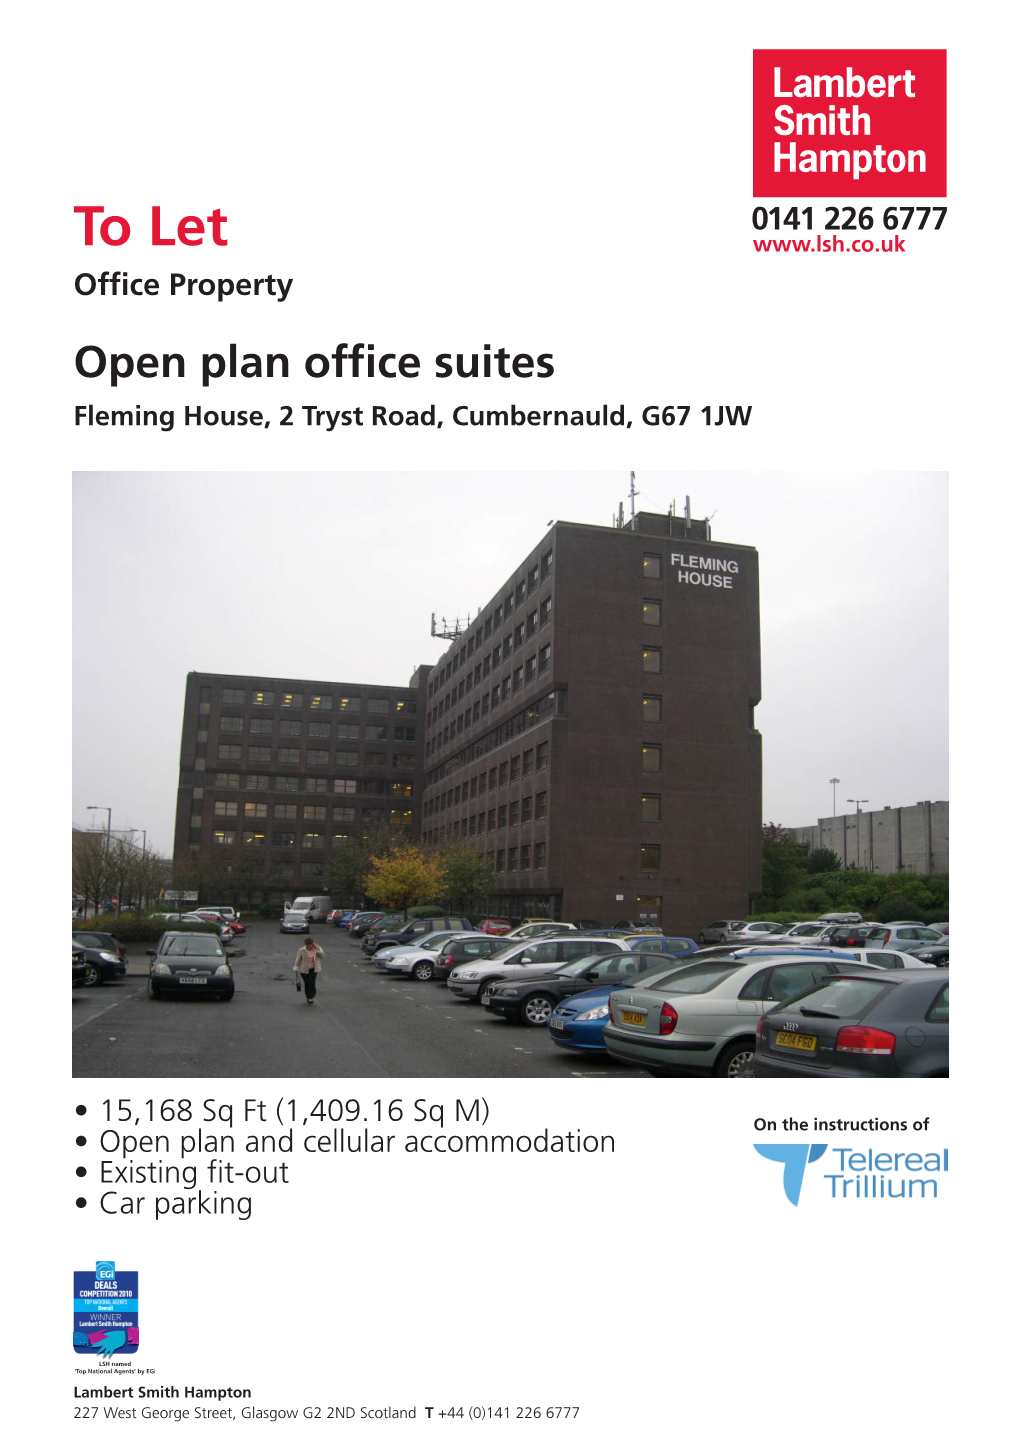 To Let Office Property Open Plan Office Suites Fleming House, 2 Tryst Road, Cumbernauld, G67 1JW